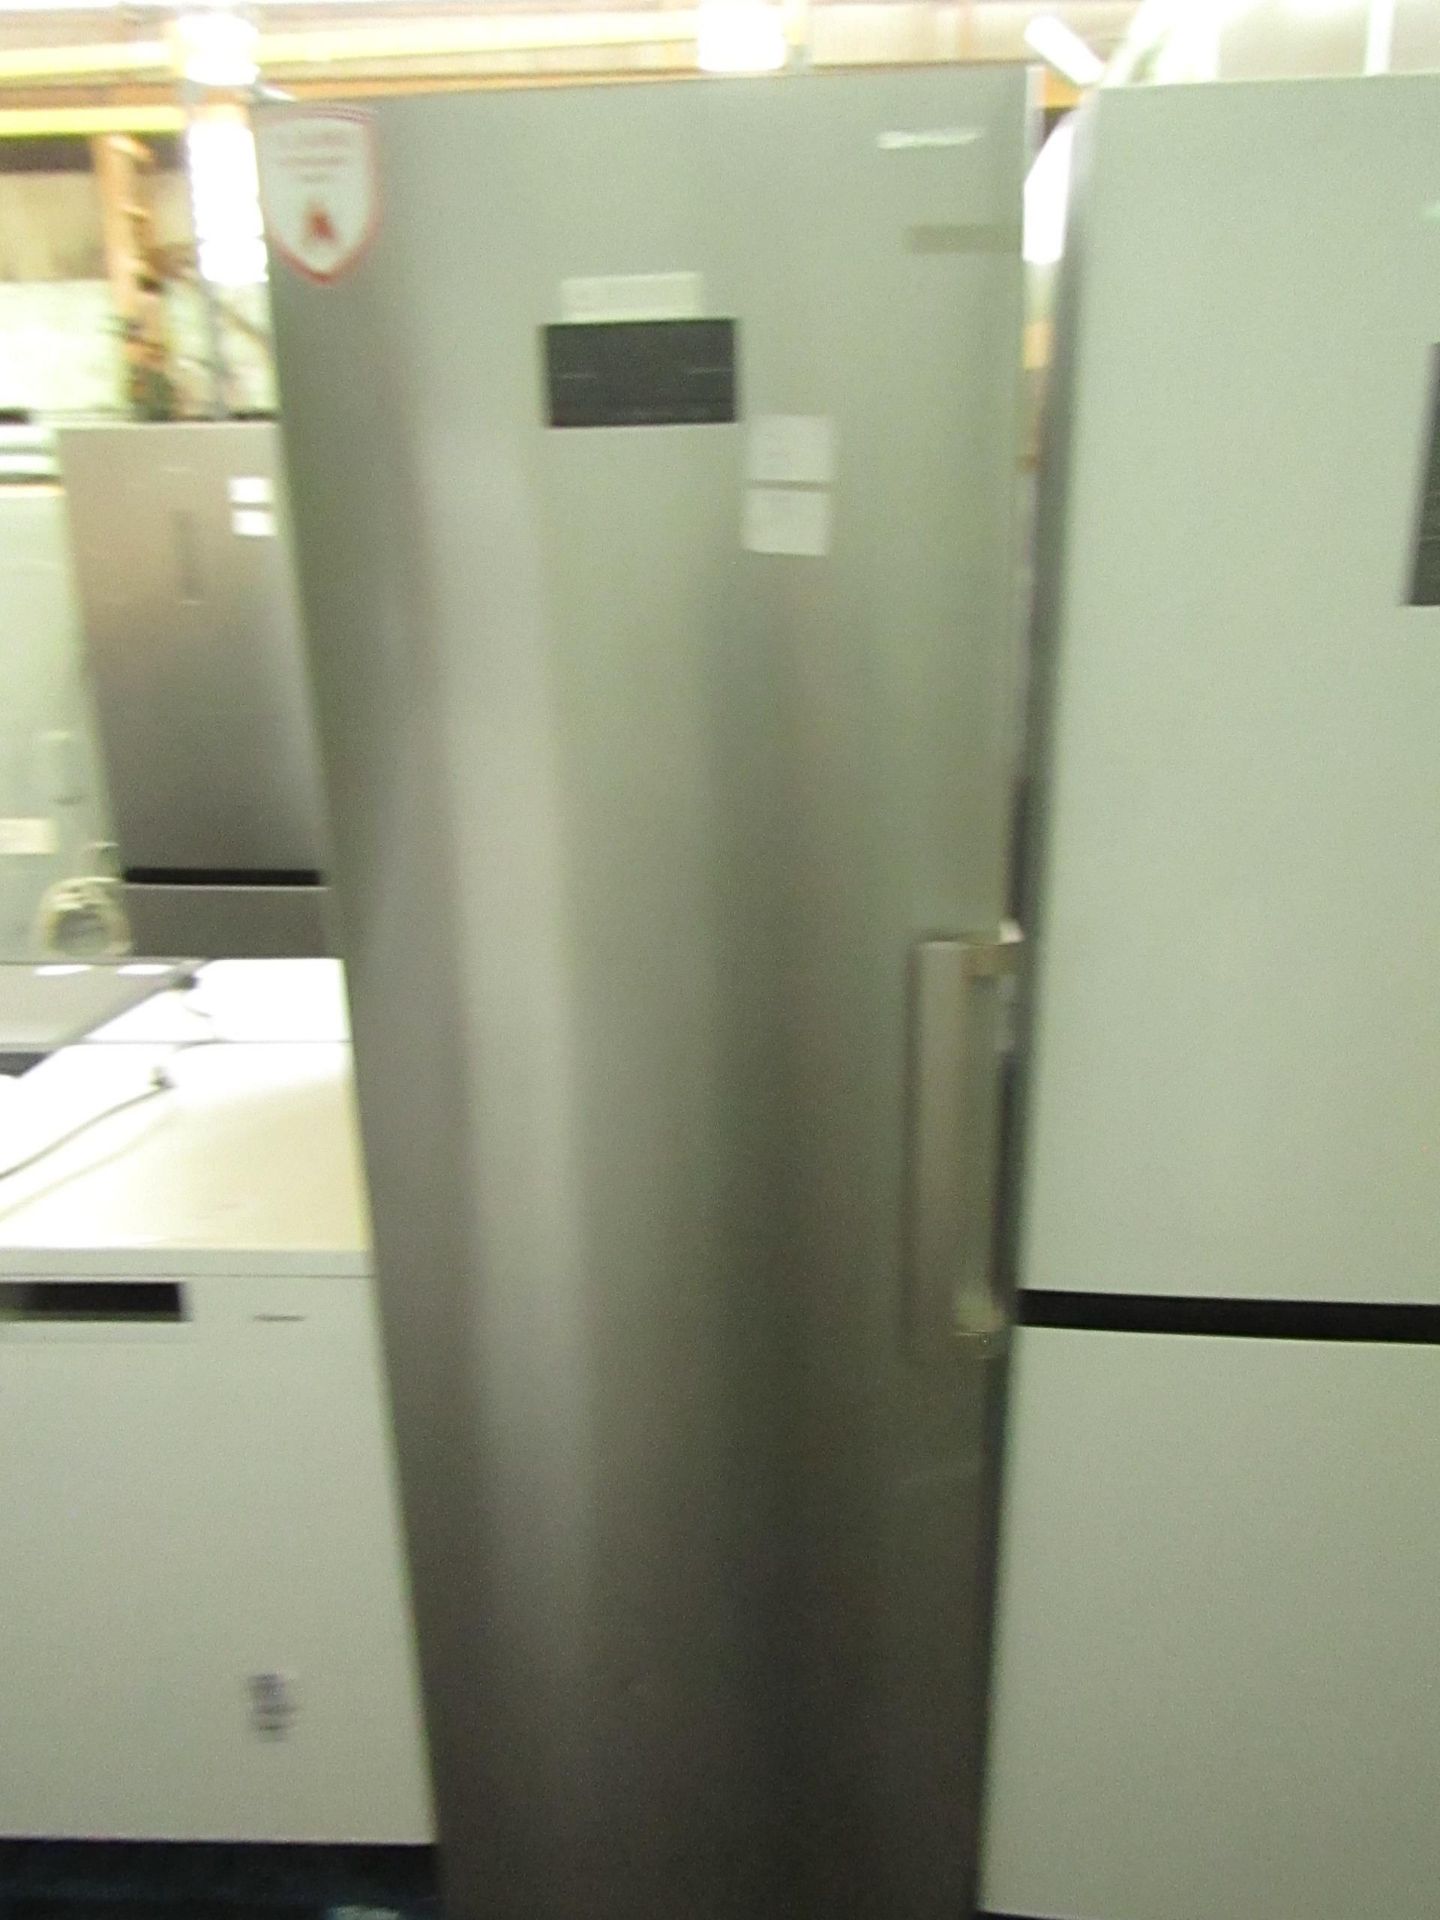 Sharp tall freestanding Freezer, Powers on but not getting cold